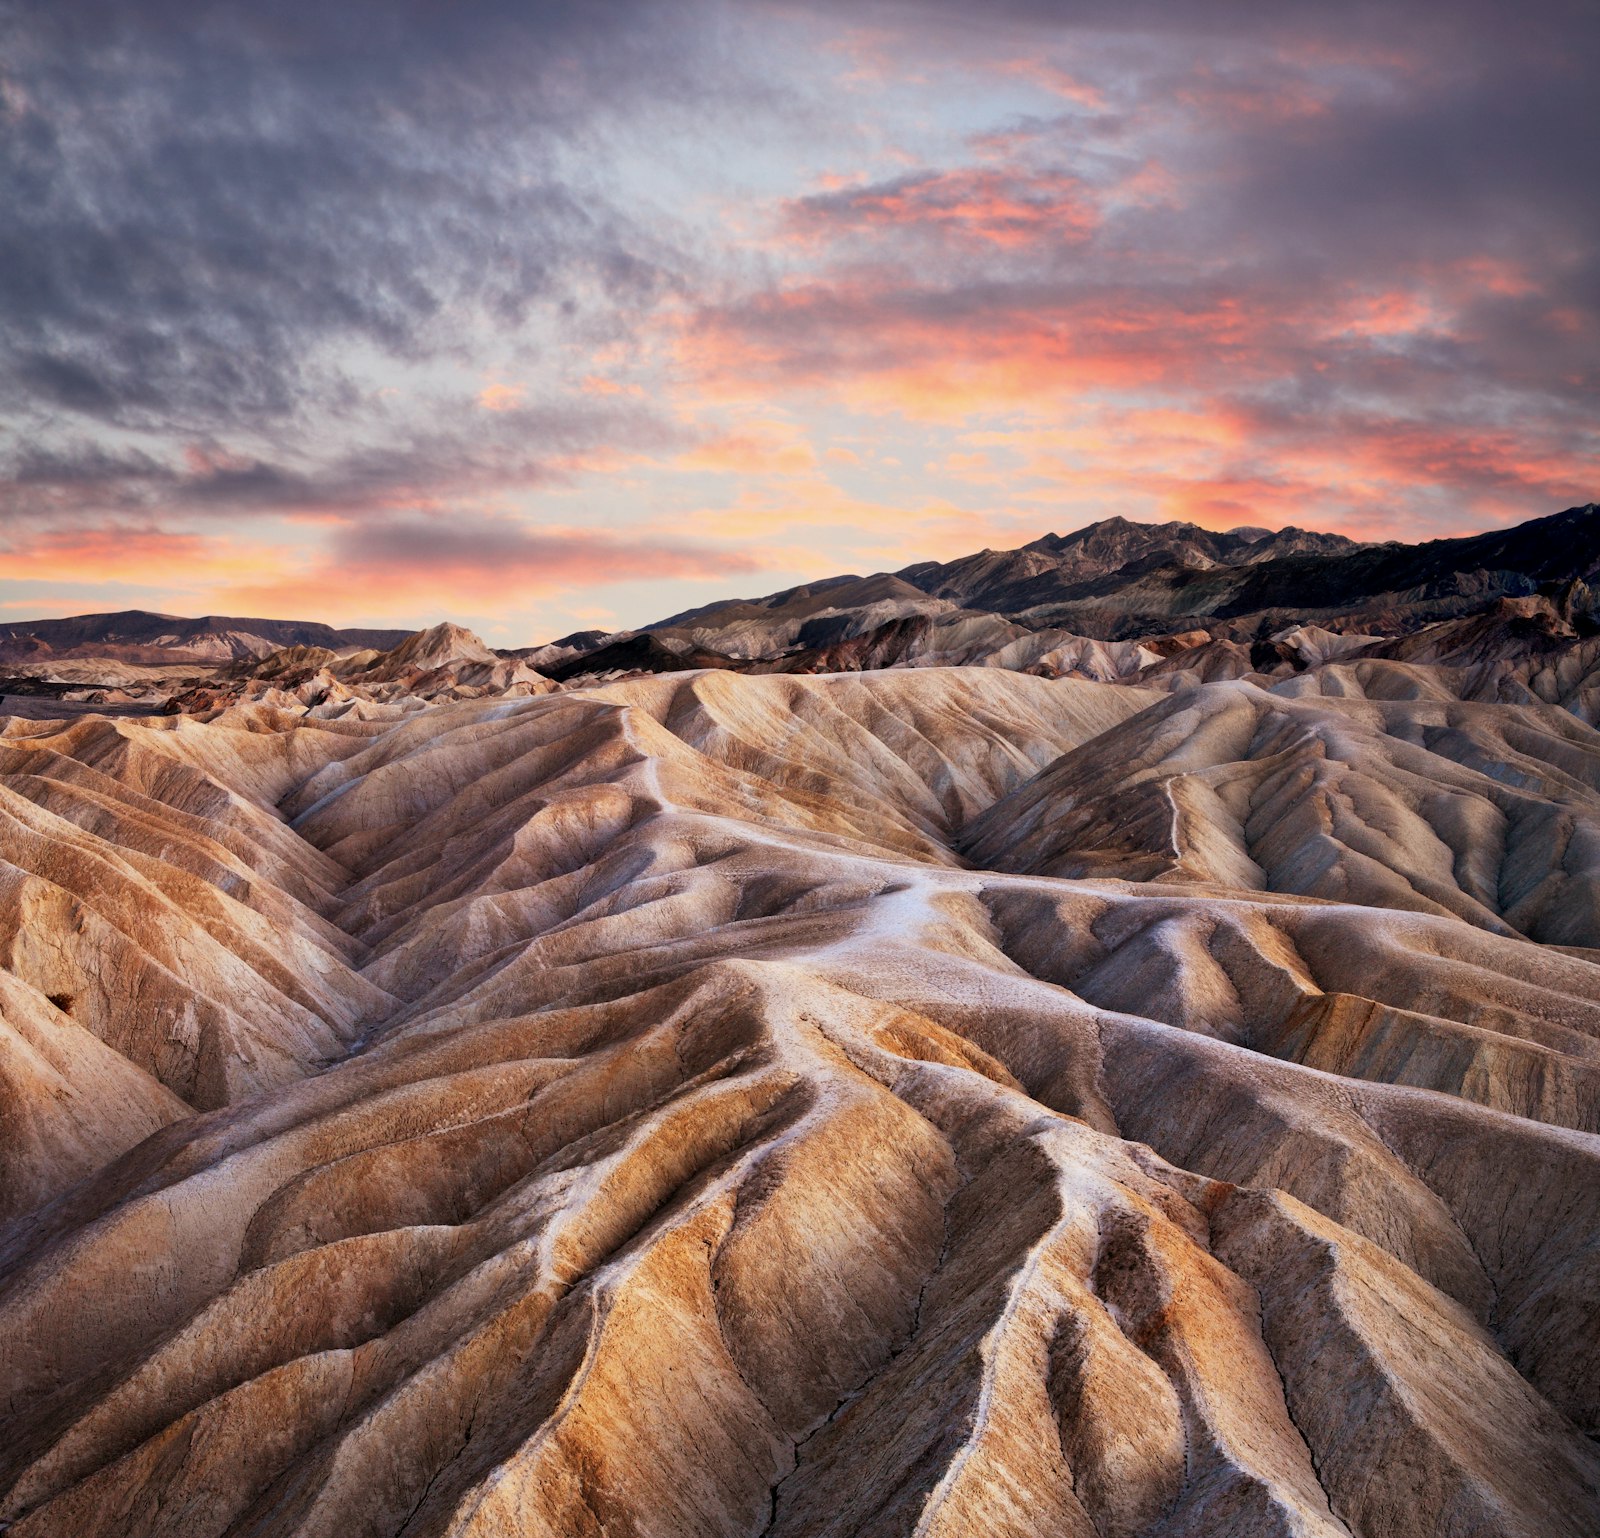 A sunset against the streaked dunes of Death Valley